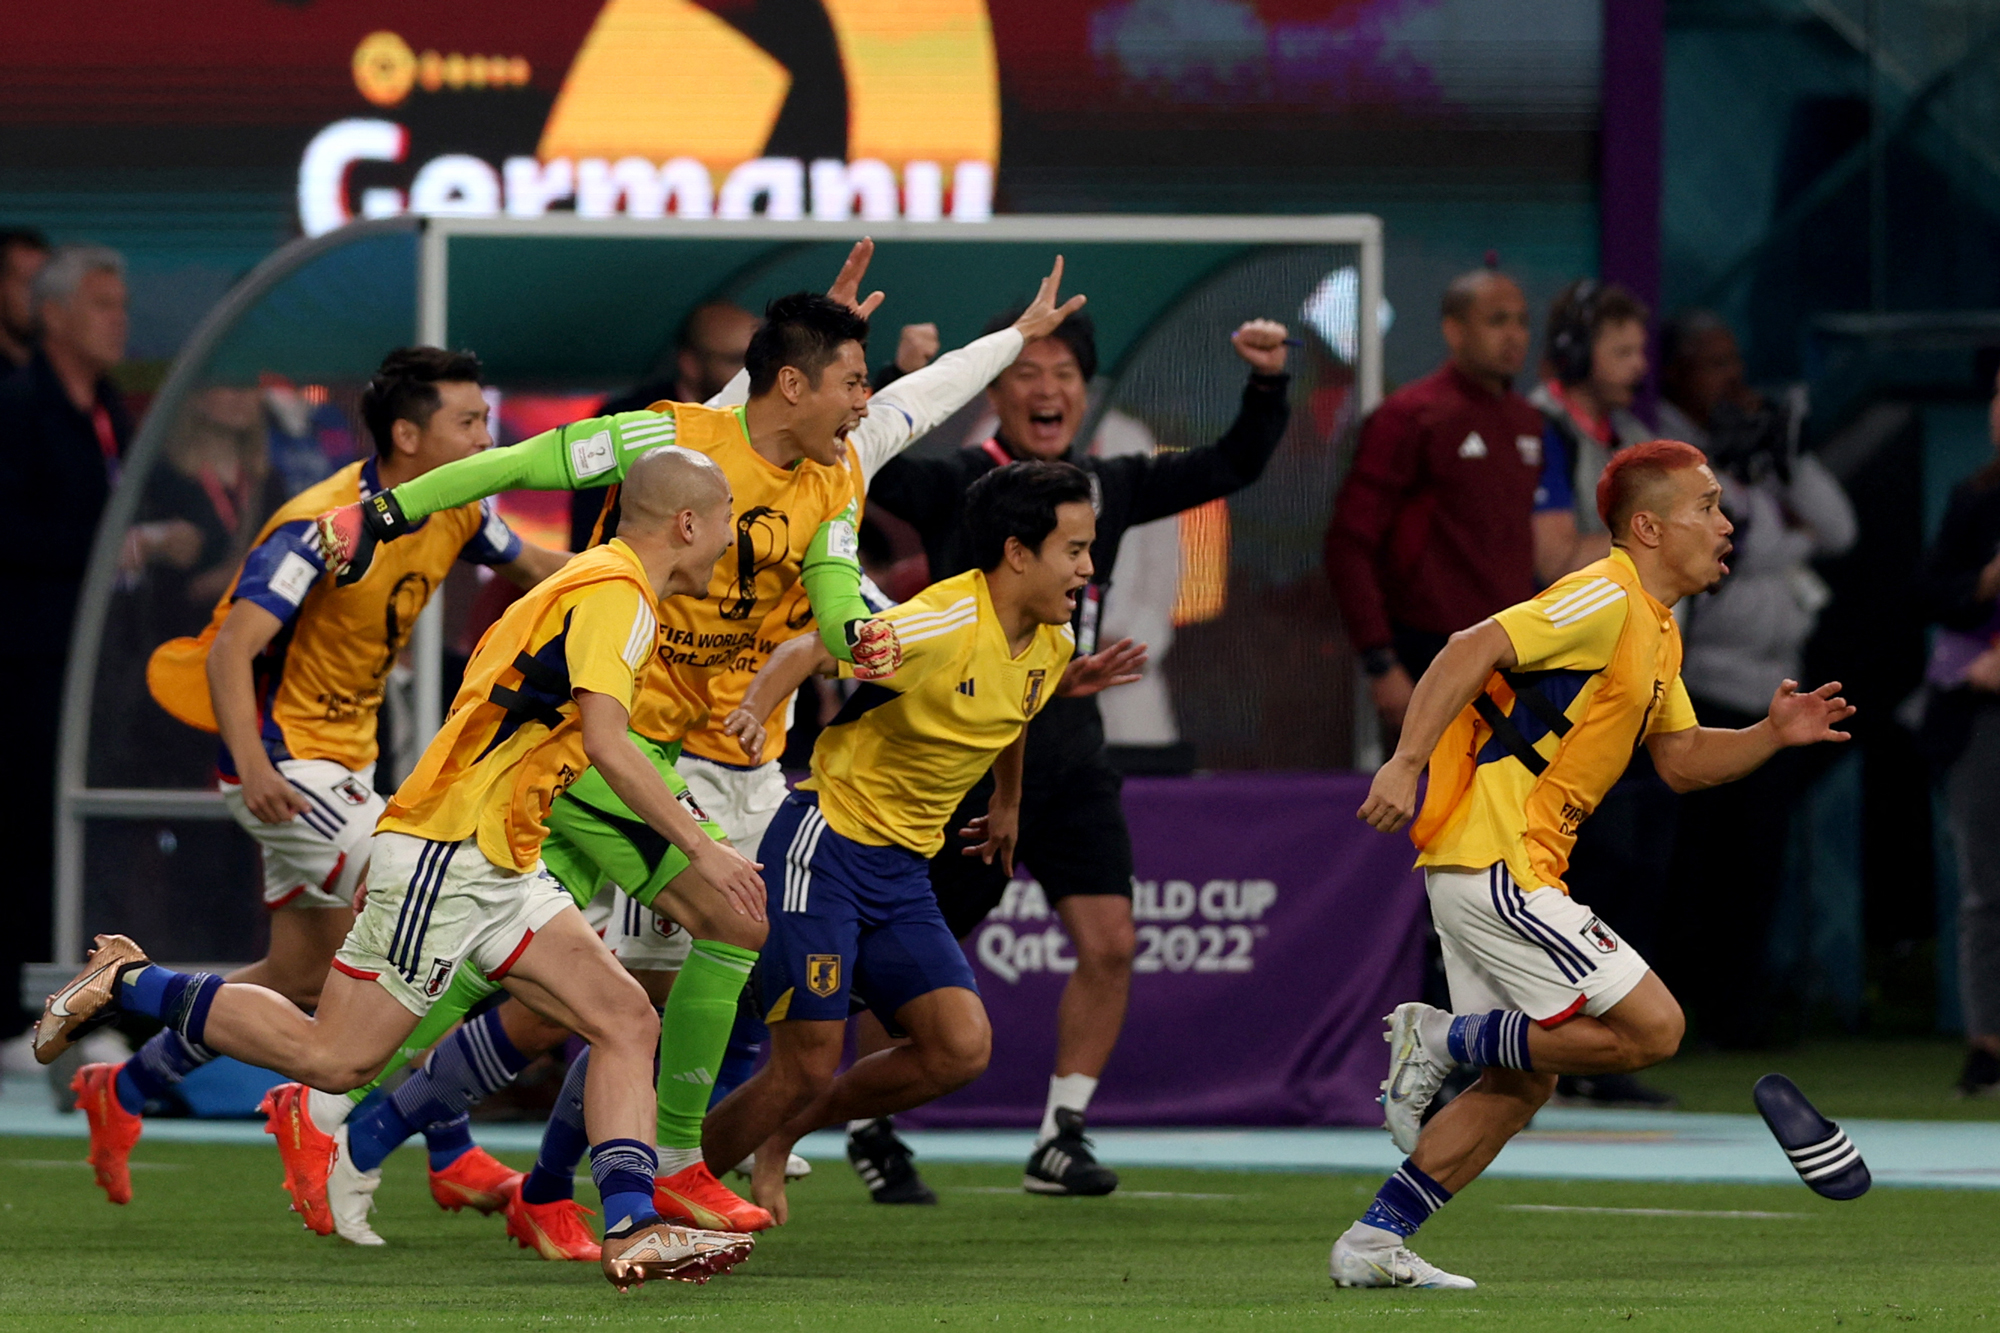 Japan's players celebrate their win against Germany at the Khalifa International Stadium in Doha, Qatar on Wednesday.